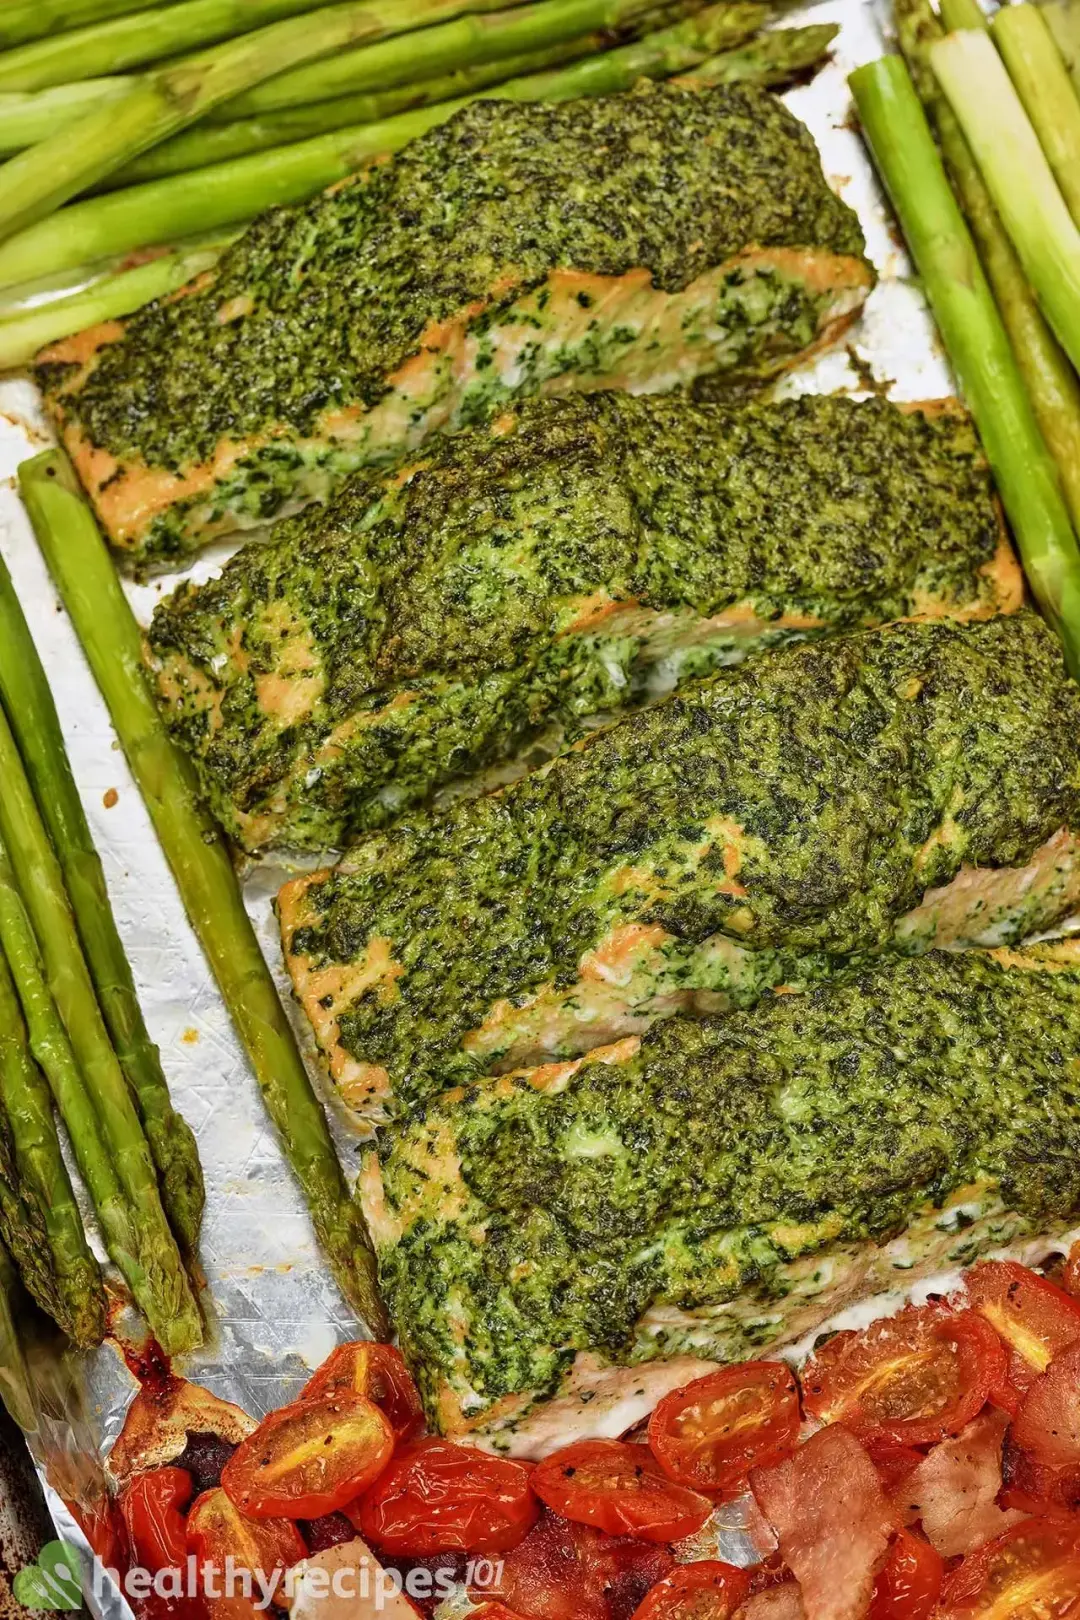 A close-up shot of a baking tray full of pesto salmon and baked vegetables taken from above